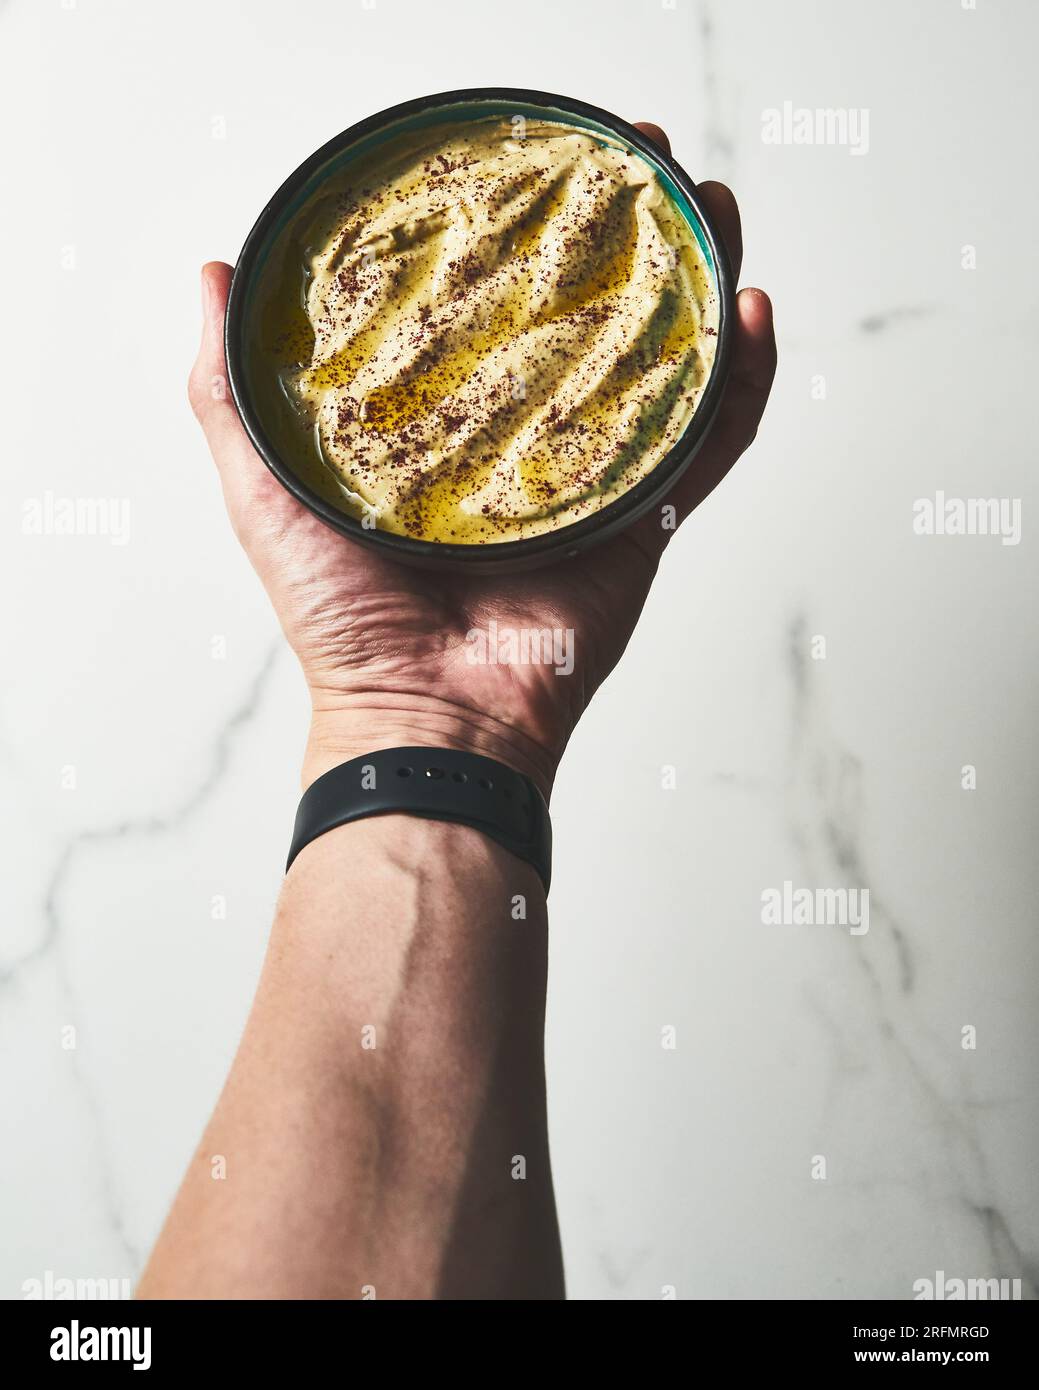 Mutabal or Moutabal - Middle Eastern dip made from roasted eggplants with tahini, garlic and lemon juice. It's creamy, smoky, and tangy. Stock Photo